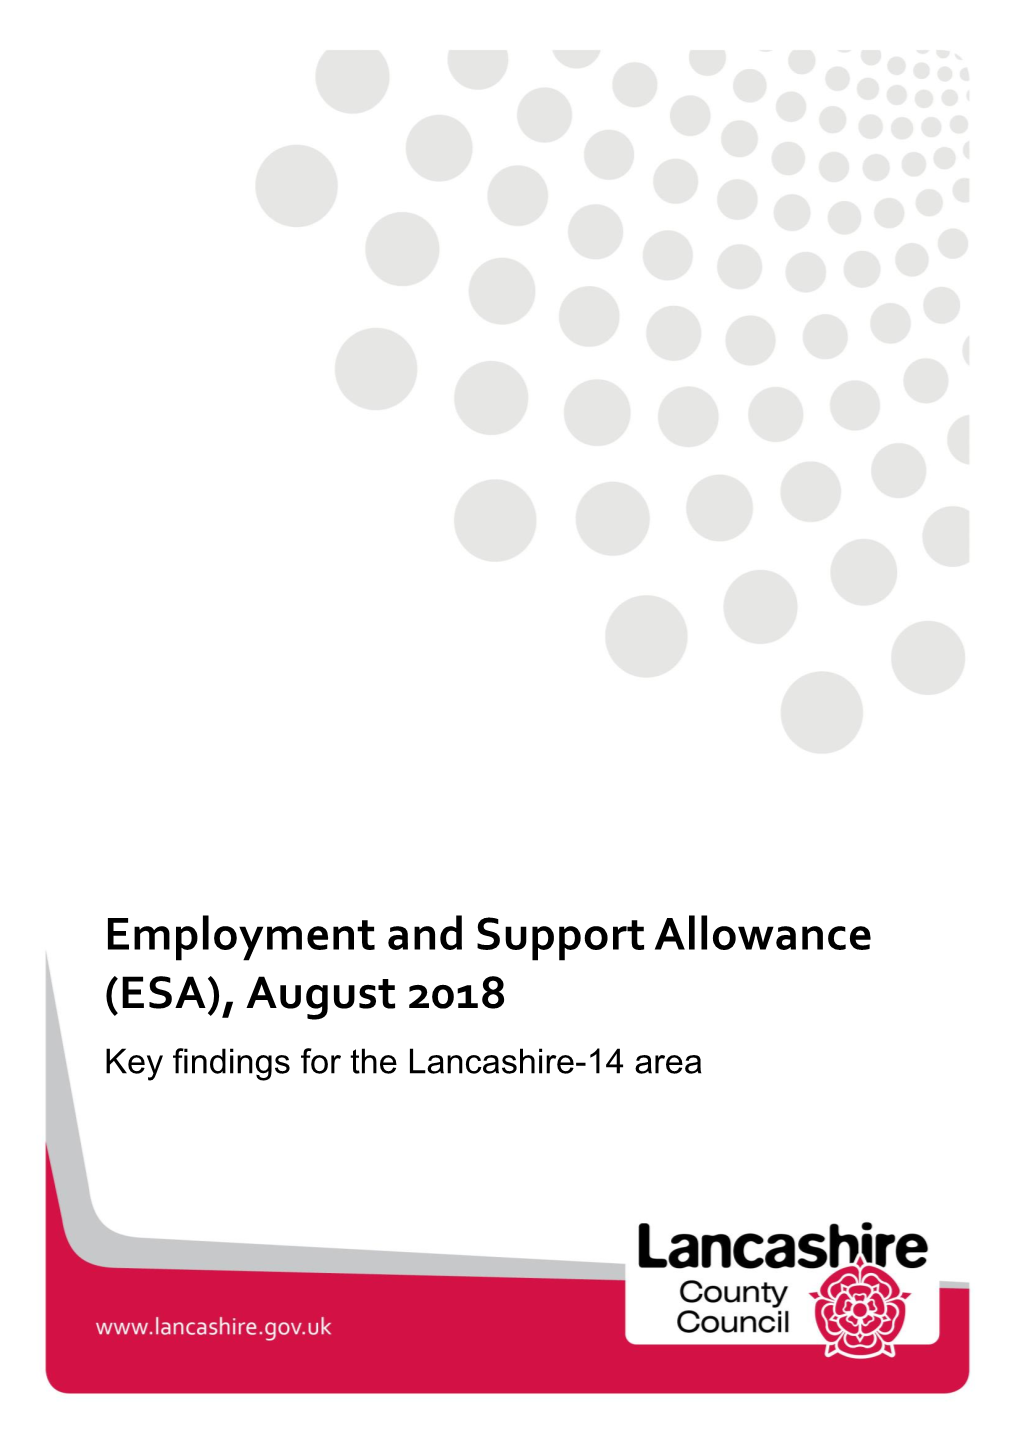 Employment and Support Allowance (ESA), August 2018 Key Findings for the Lancashire-14 Area